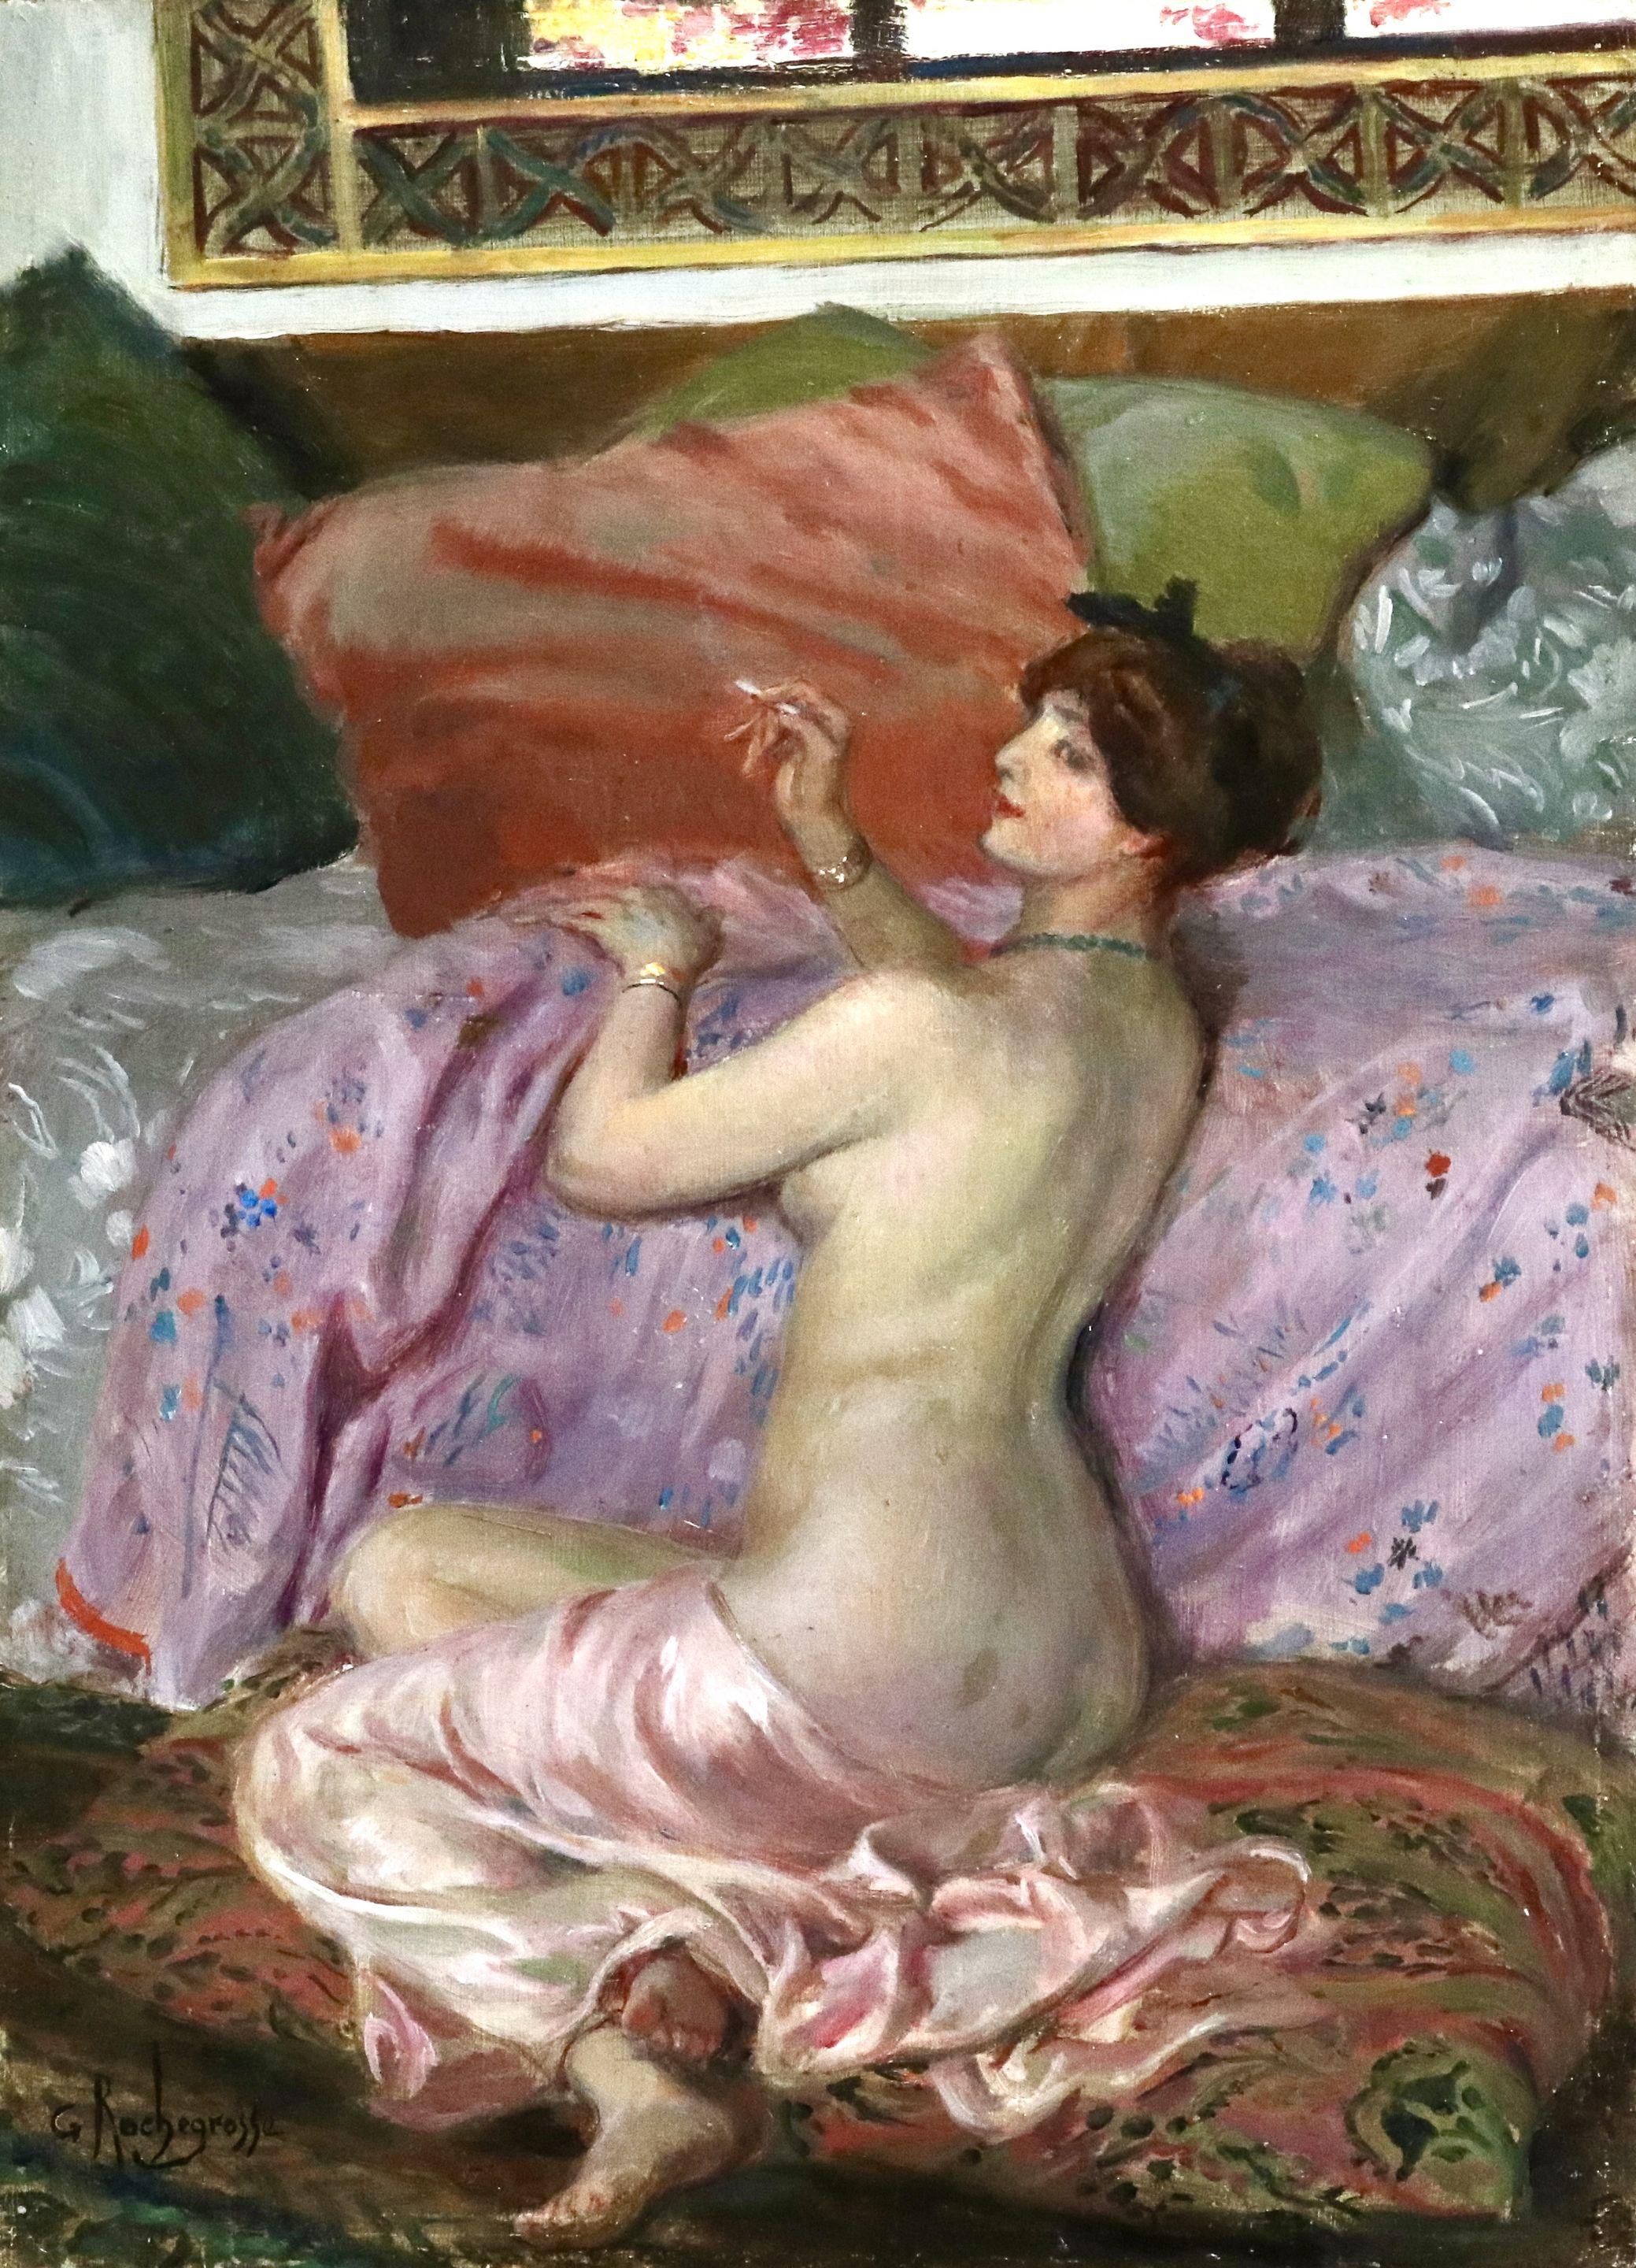 Georges Antoine Rochegrosse Figurative Painting - Nude Smoking a Cigarette - 19th Century Oil, Woman in Interior by Rochegrosse